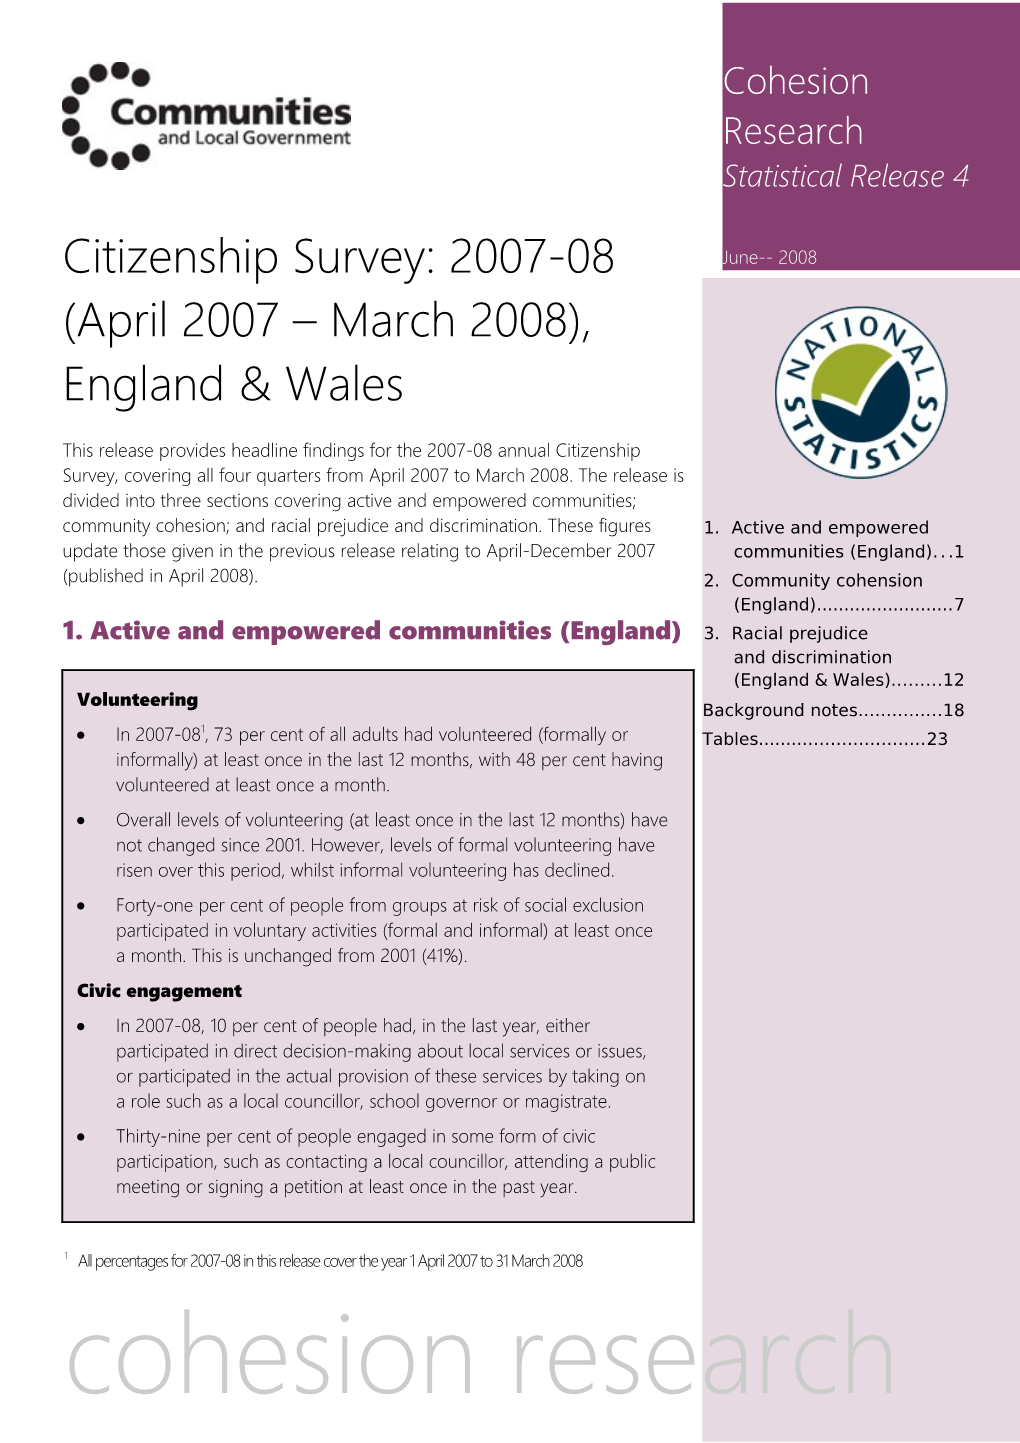 1. Active and Empowered Communities (England)